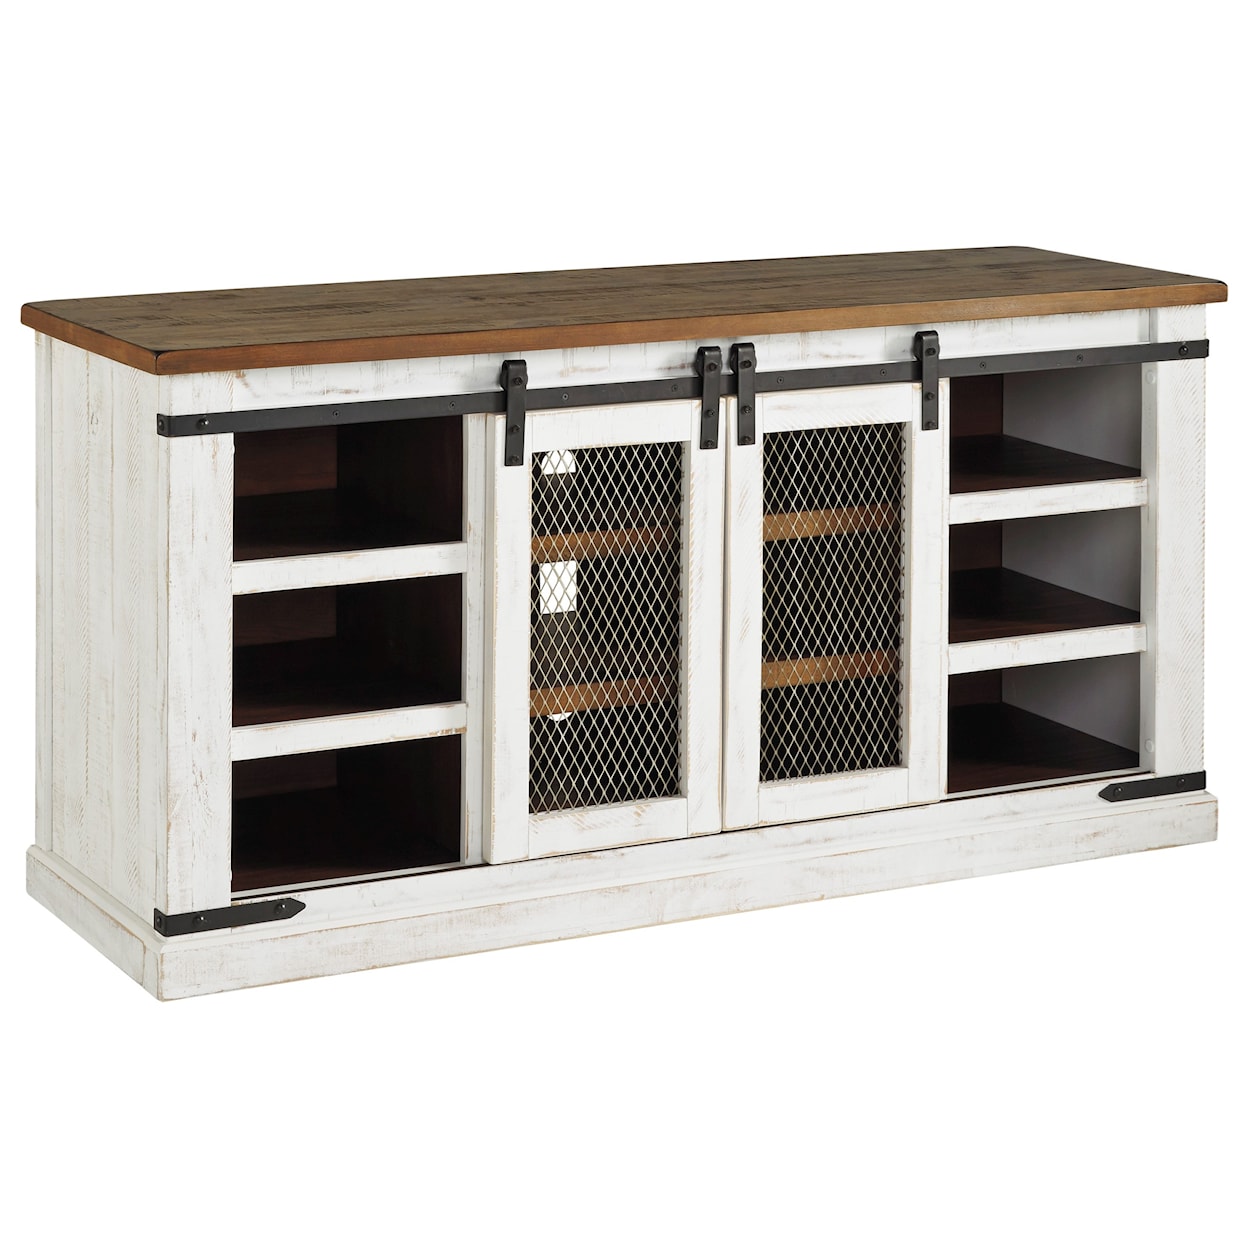 Signature Design by Ashley Furniture Danell Ridge Large TV Stand